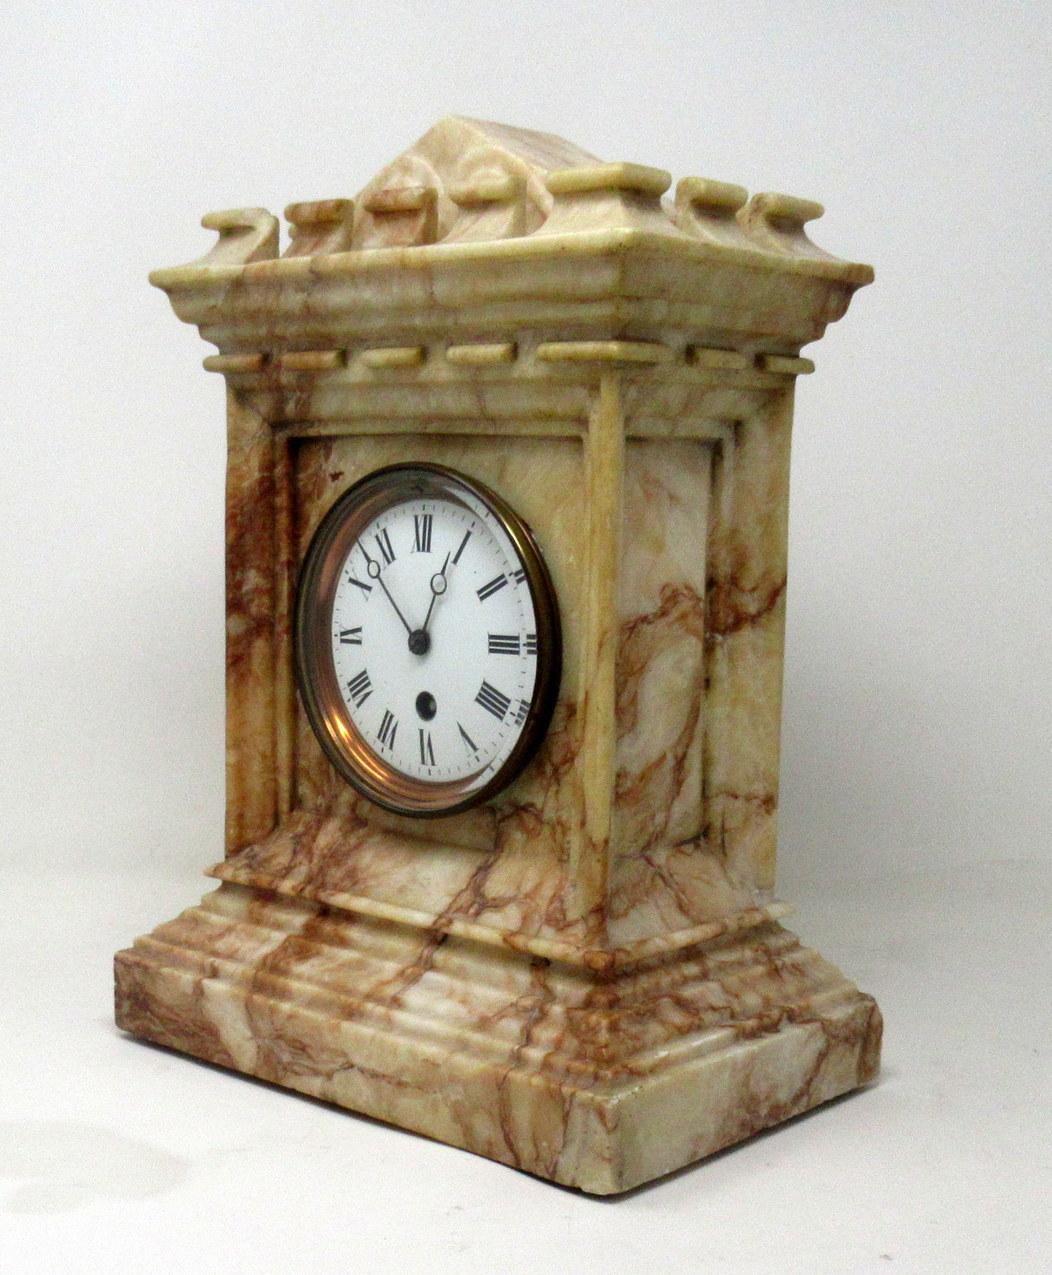 An exceptional well figured carved marble mantle clock of French origin, second half of the 19th century.

The stunning example of architectural outline with an arched roof within a surrounding crenellation modelled to resemble an ancient